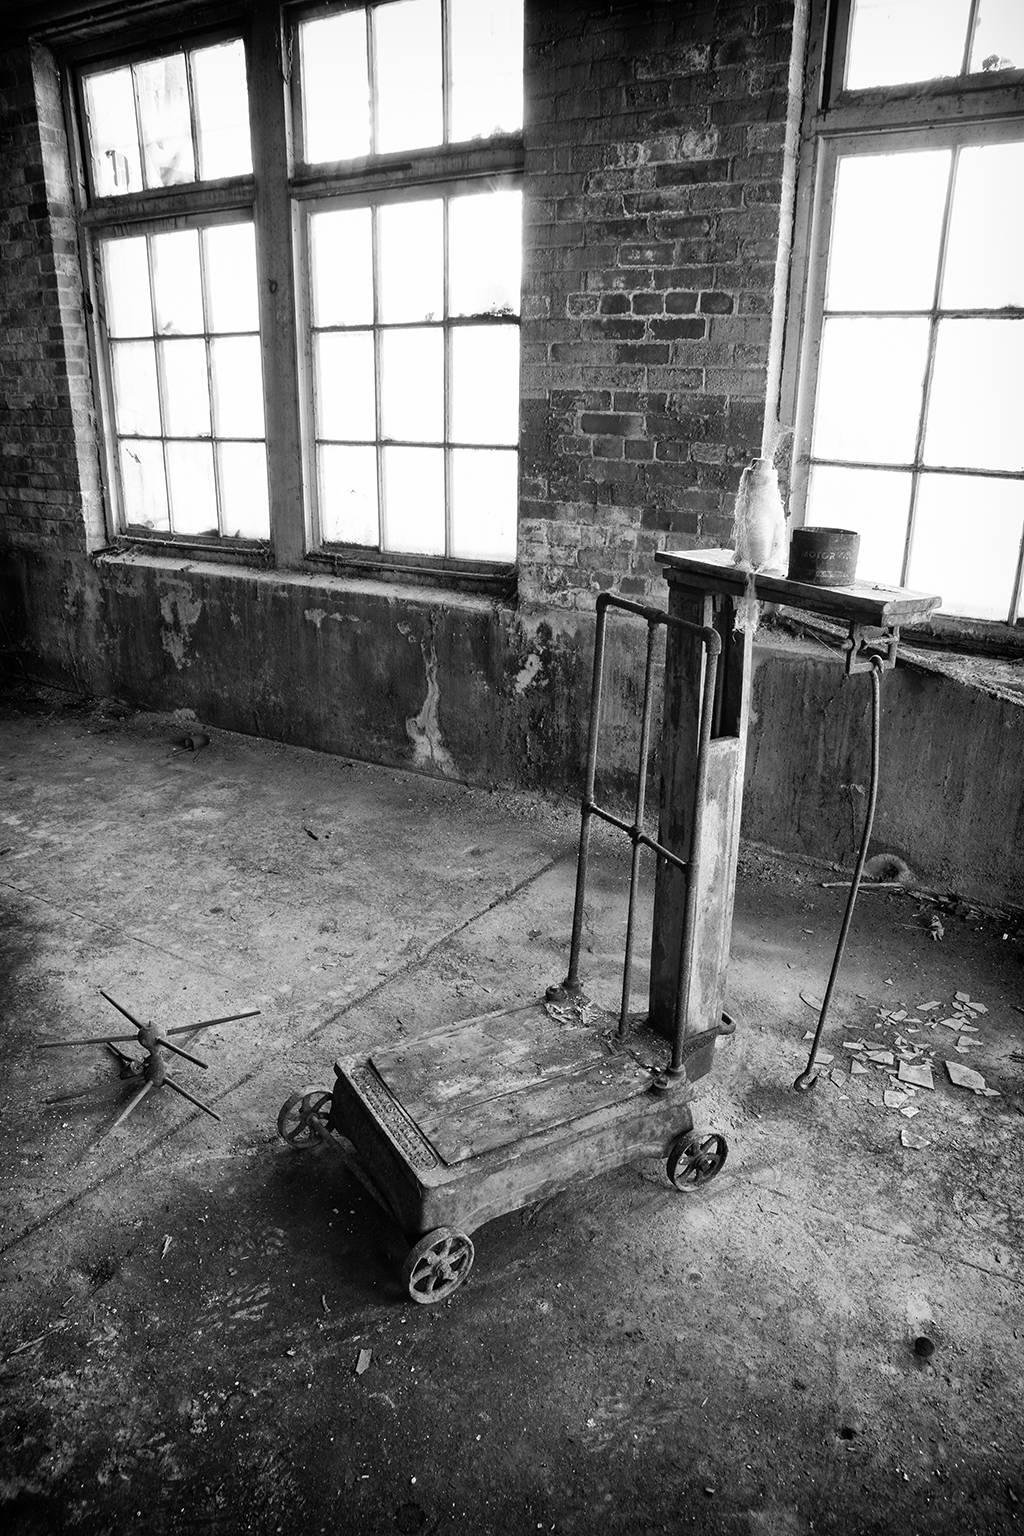 "Scale", industrial, black and white, abandoned, silk mill, vintage, photograph